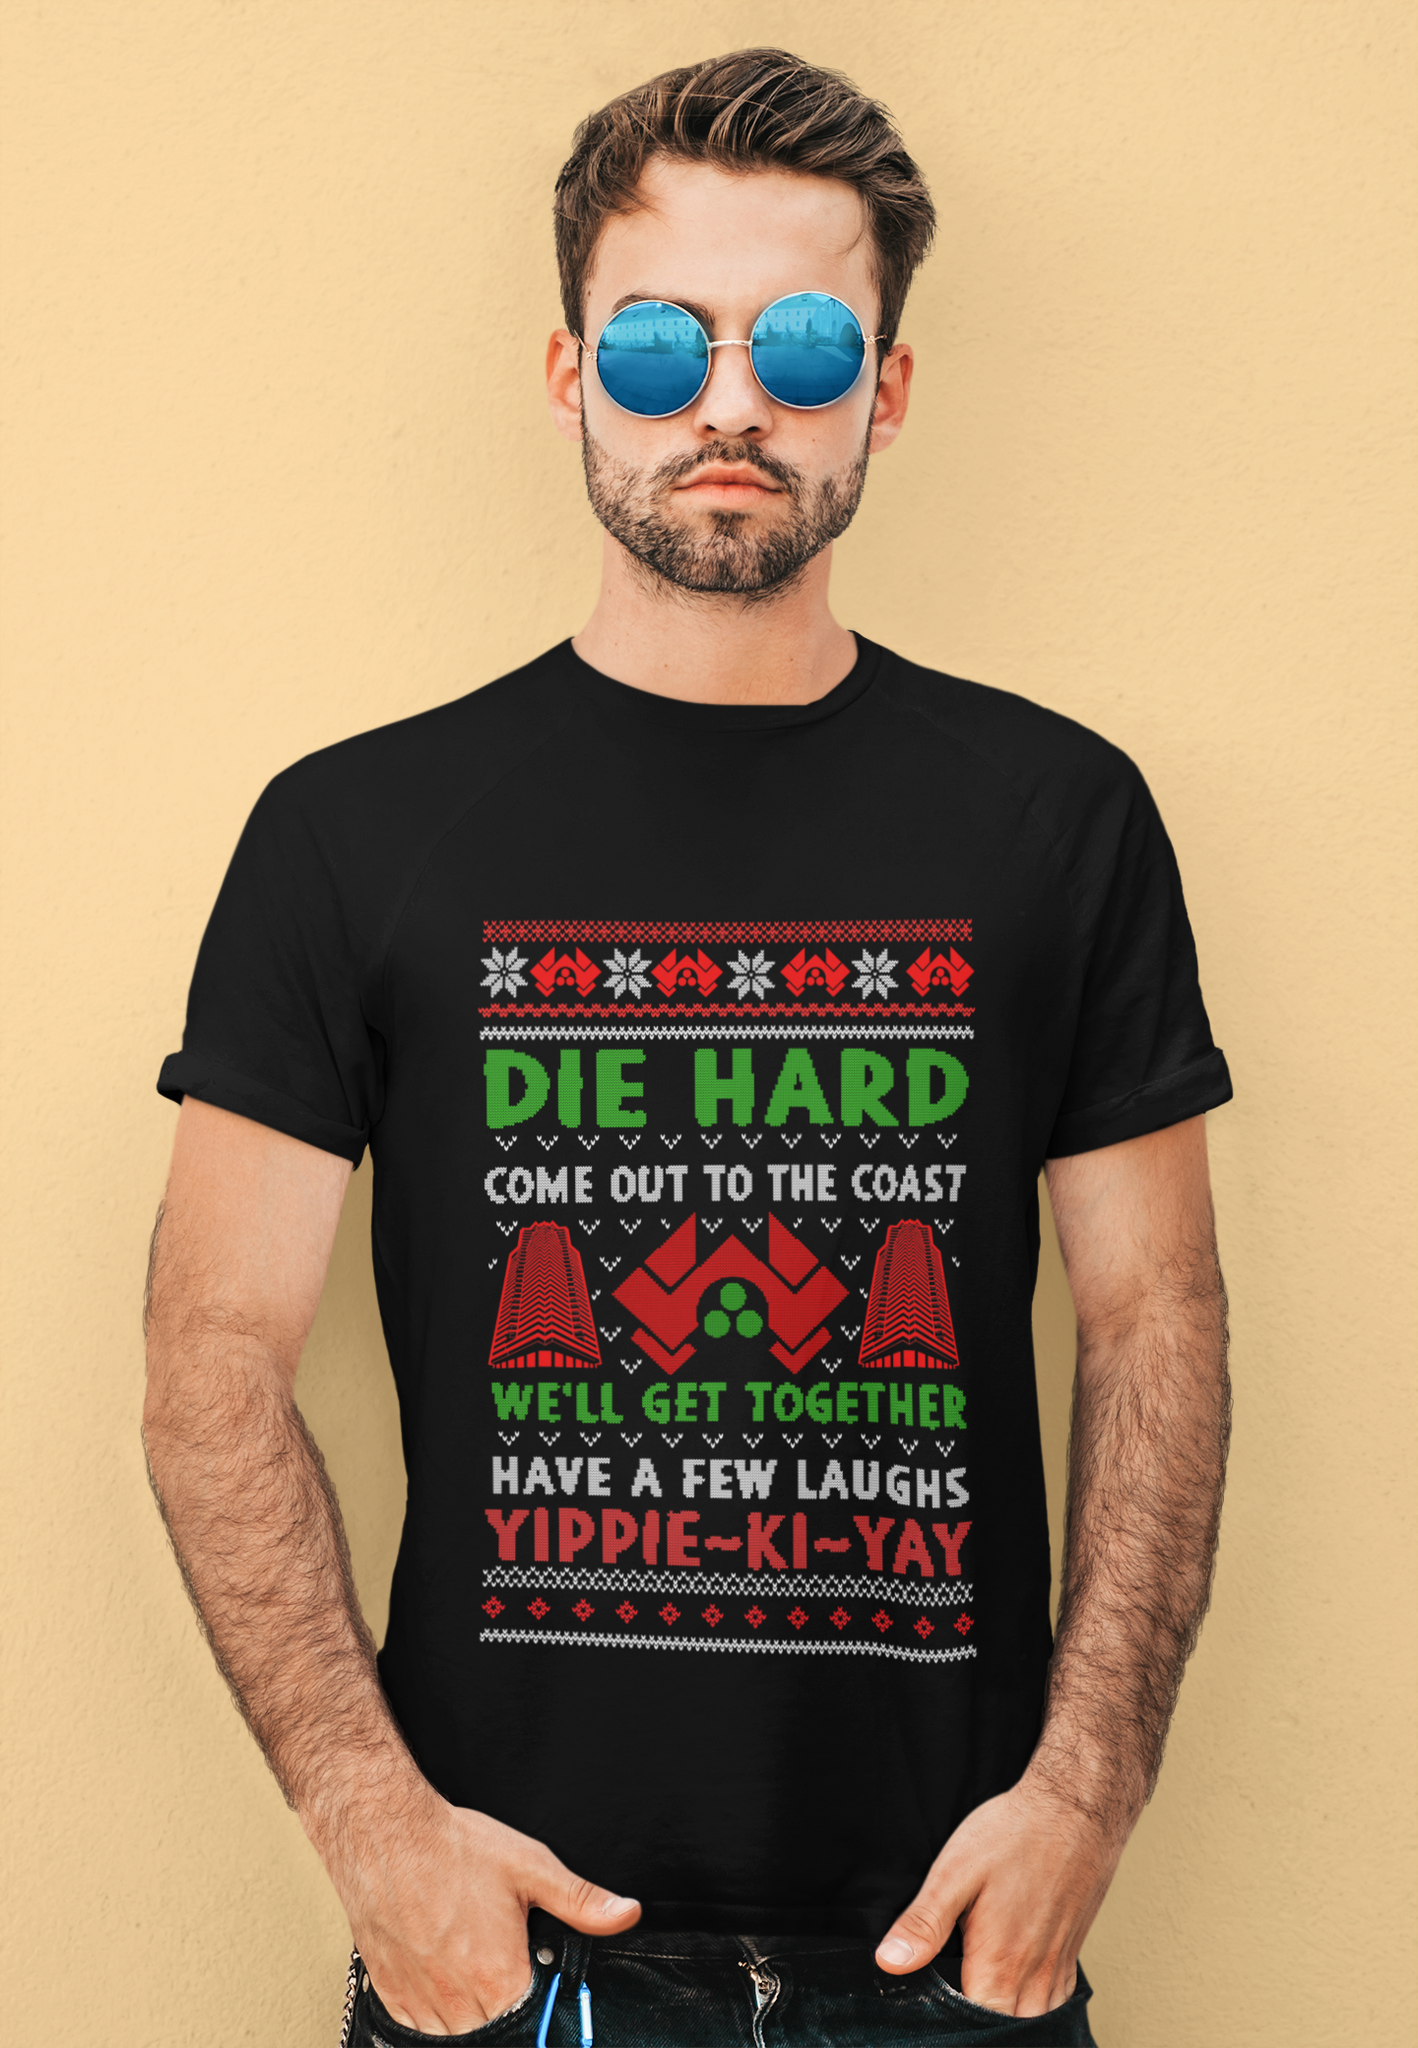 Die Hard Movie T Shirt, John McClane Quote T Shirt, Well Get Together Have A Few Laughts Tshirt, Christmas Gift